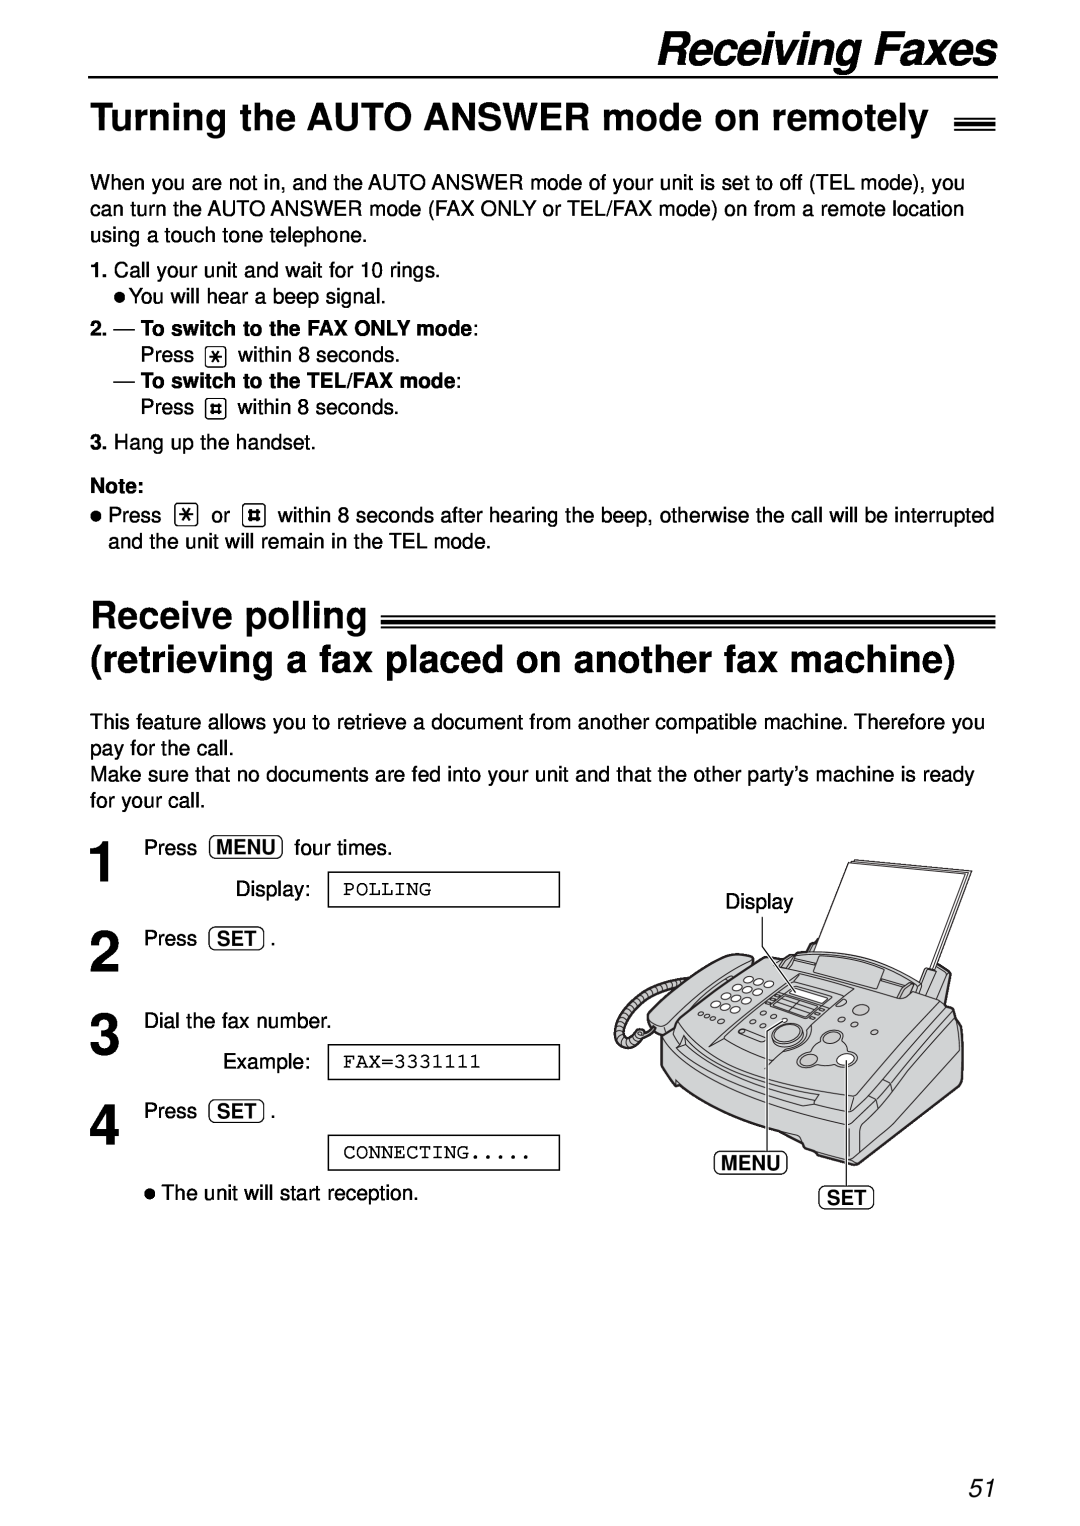 Panasonic KX-FL501NZ Turning the AUTO ANSWER mode on remotely, Receiving Faxes, To switch to the FAX ONLY mode, Menu Set 